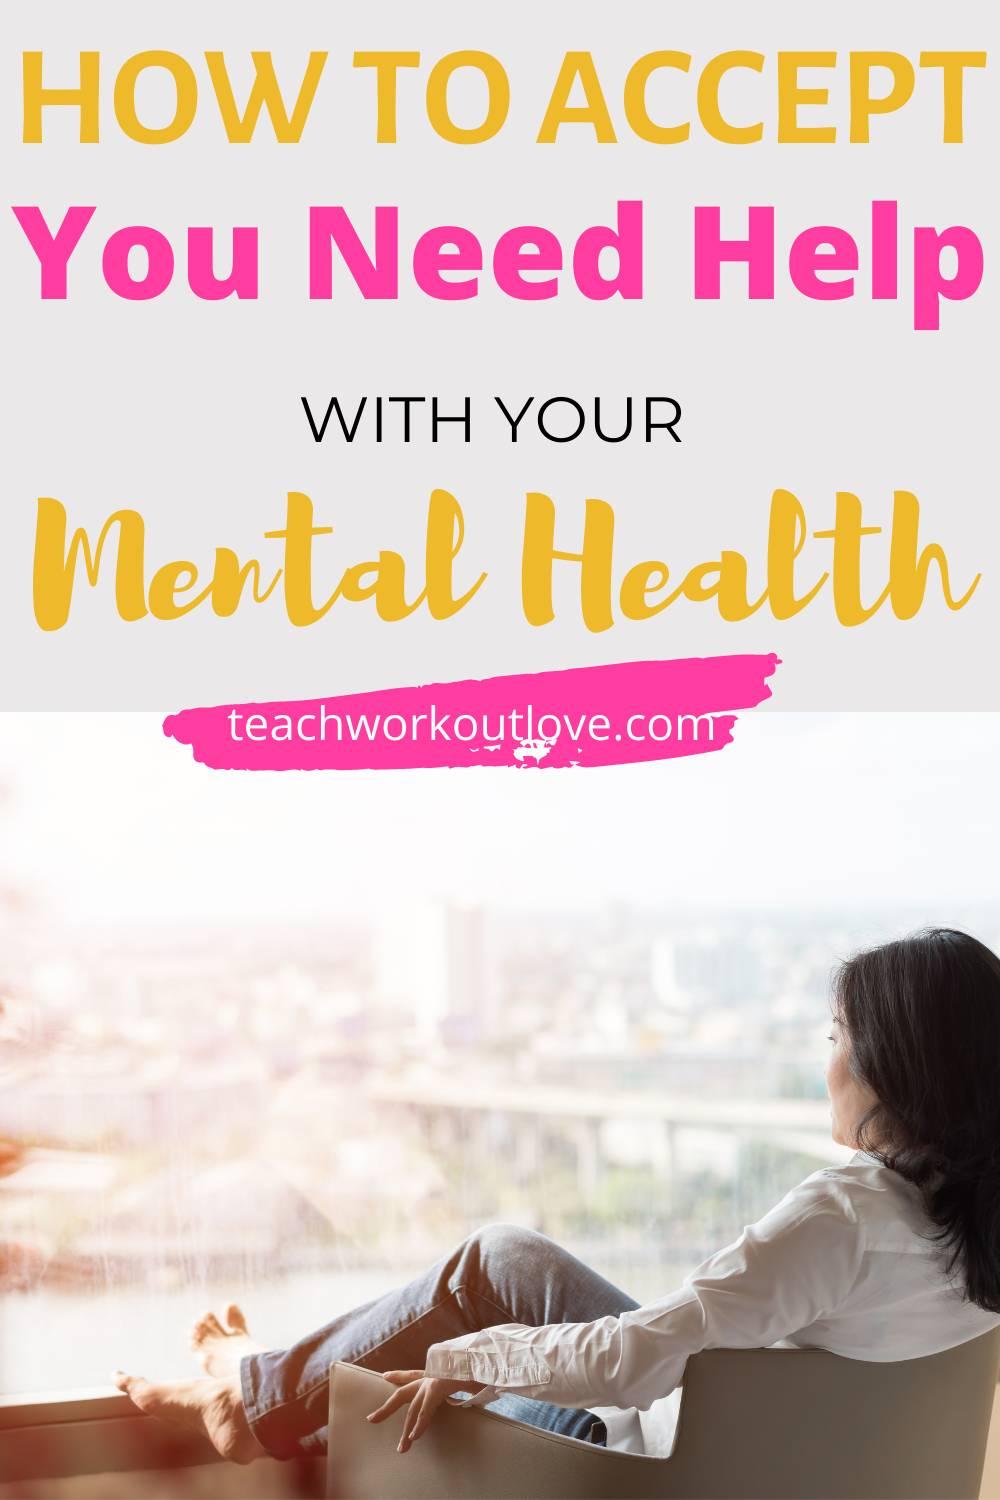 We will discuss how to accept that you need help, and how to go about seeking it for your own recovery and mental health.